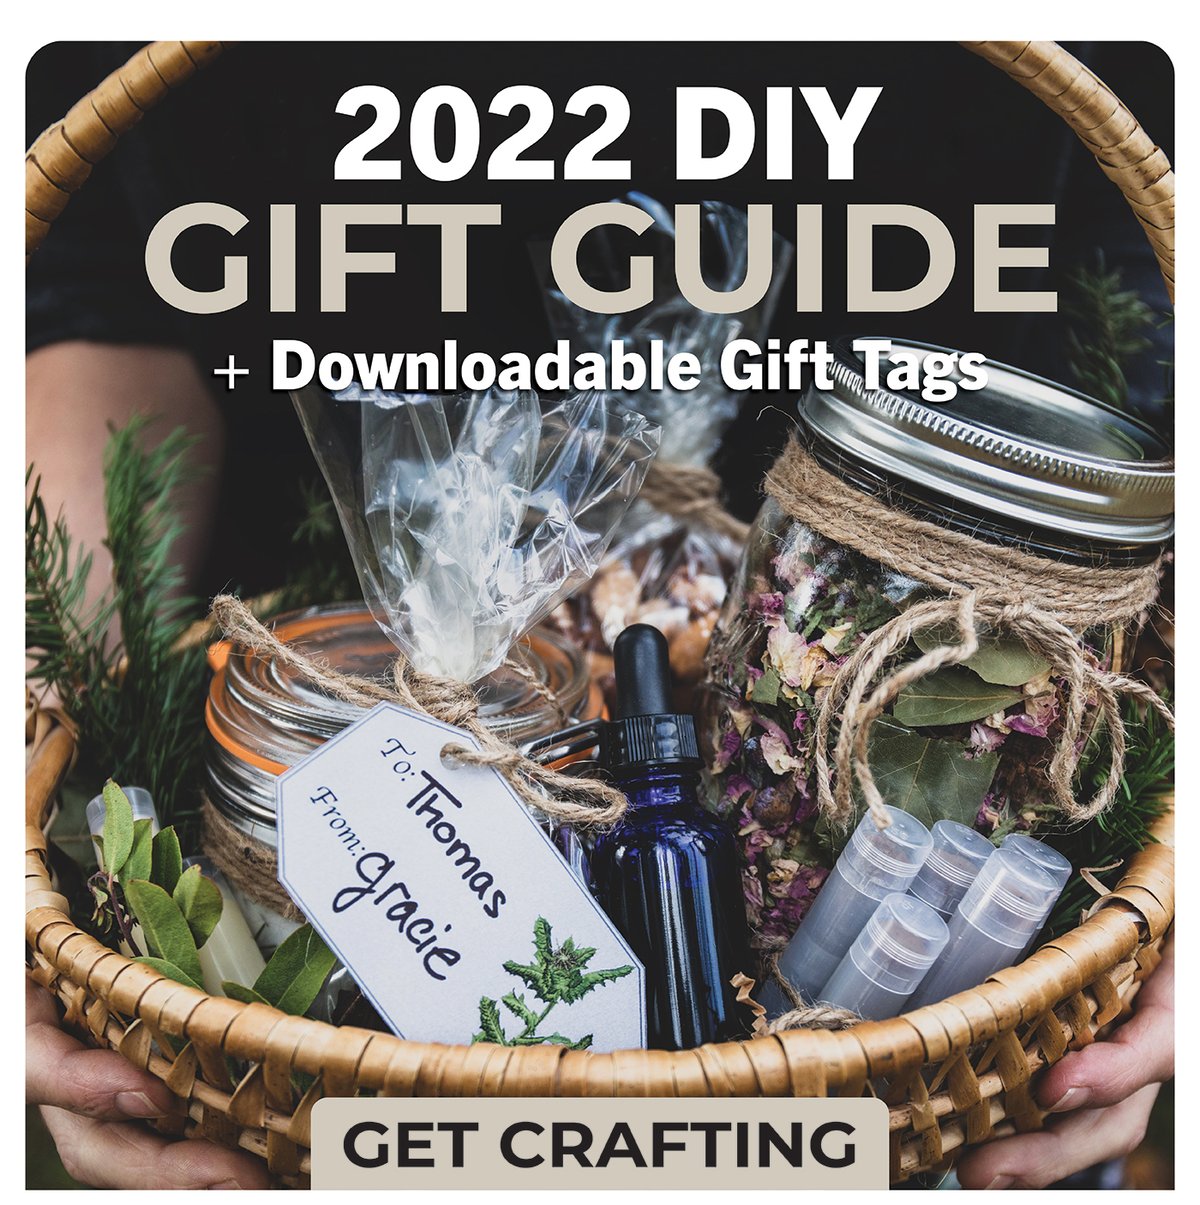 2022 DIY Gift Guide + FREE gift tags